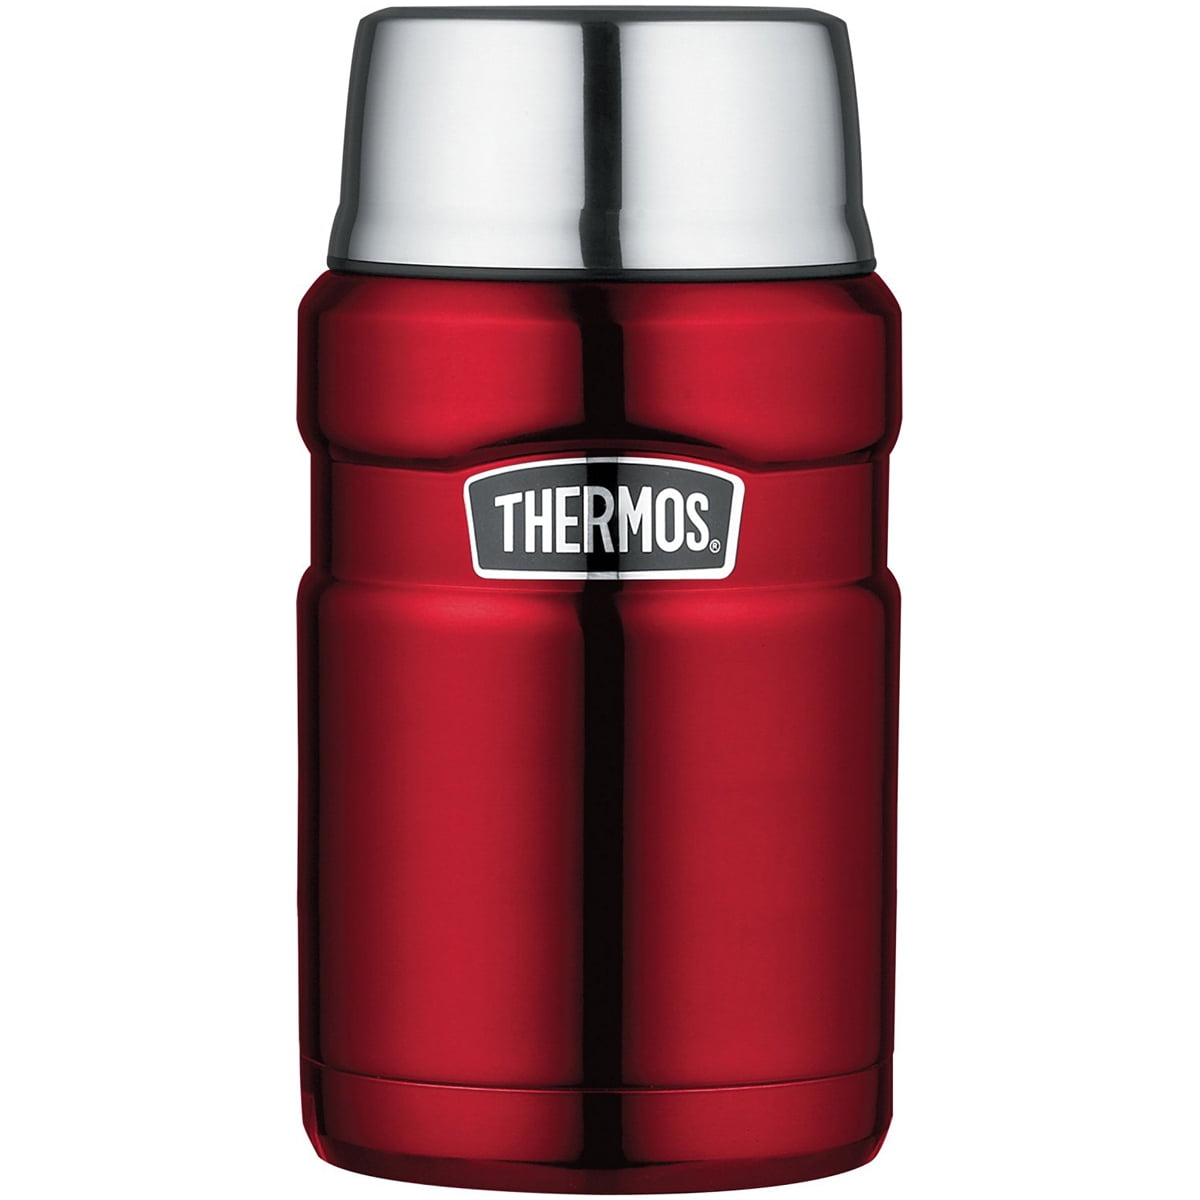 Thermos Stainless King Food Jar, Army Green, 24 fl oz 